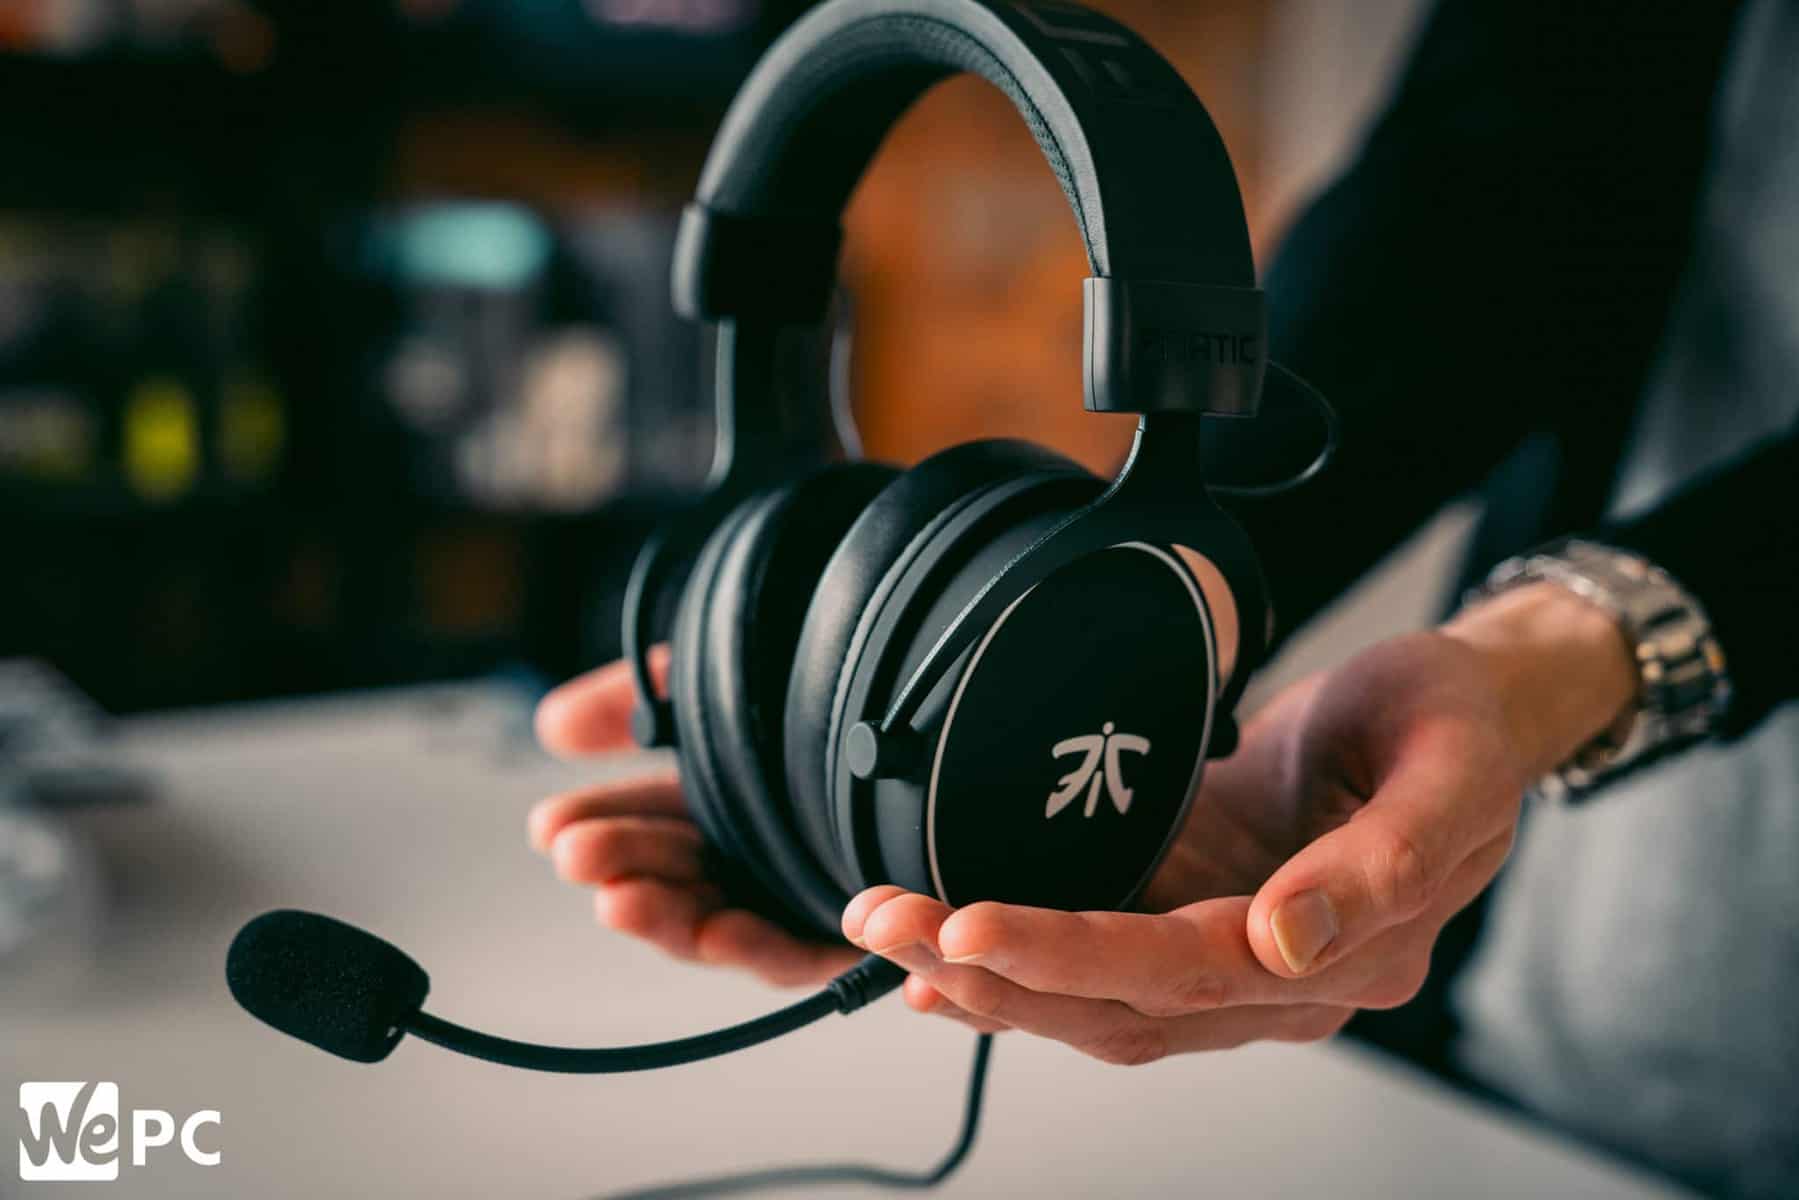 Logitech G Pro X vs Fnatic React - The Best Budget Gaming Headsets? 